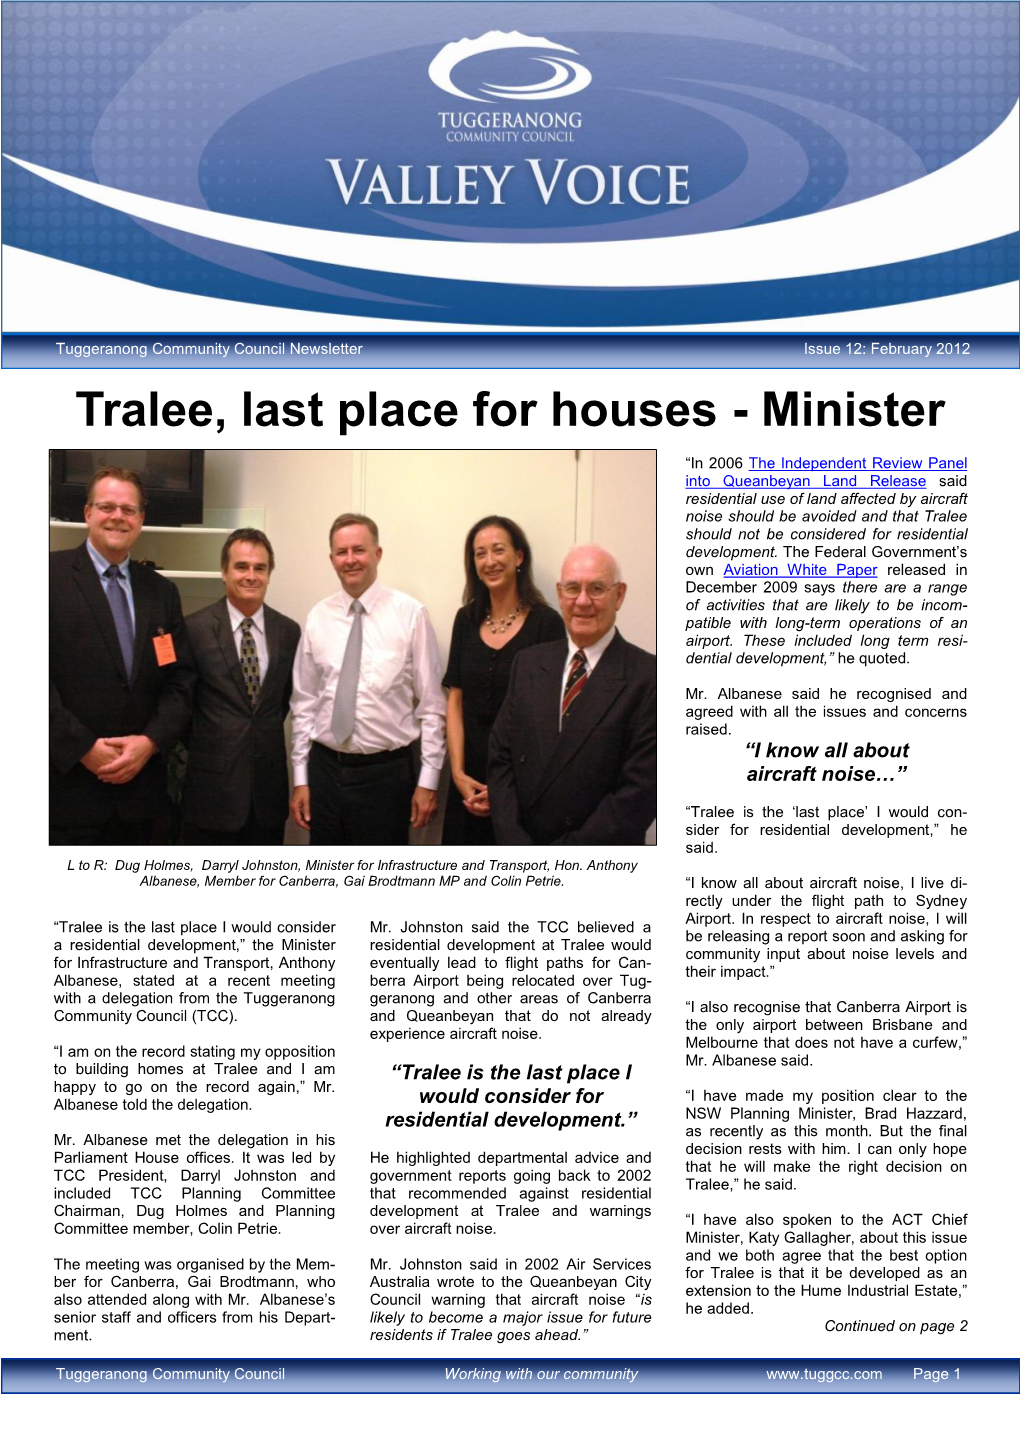 Tralee, Last Place for Houses - Minister